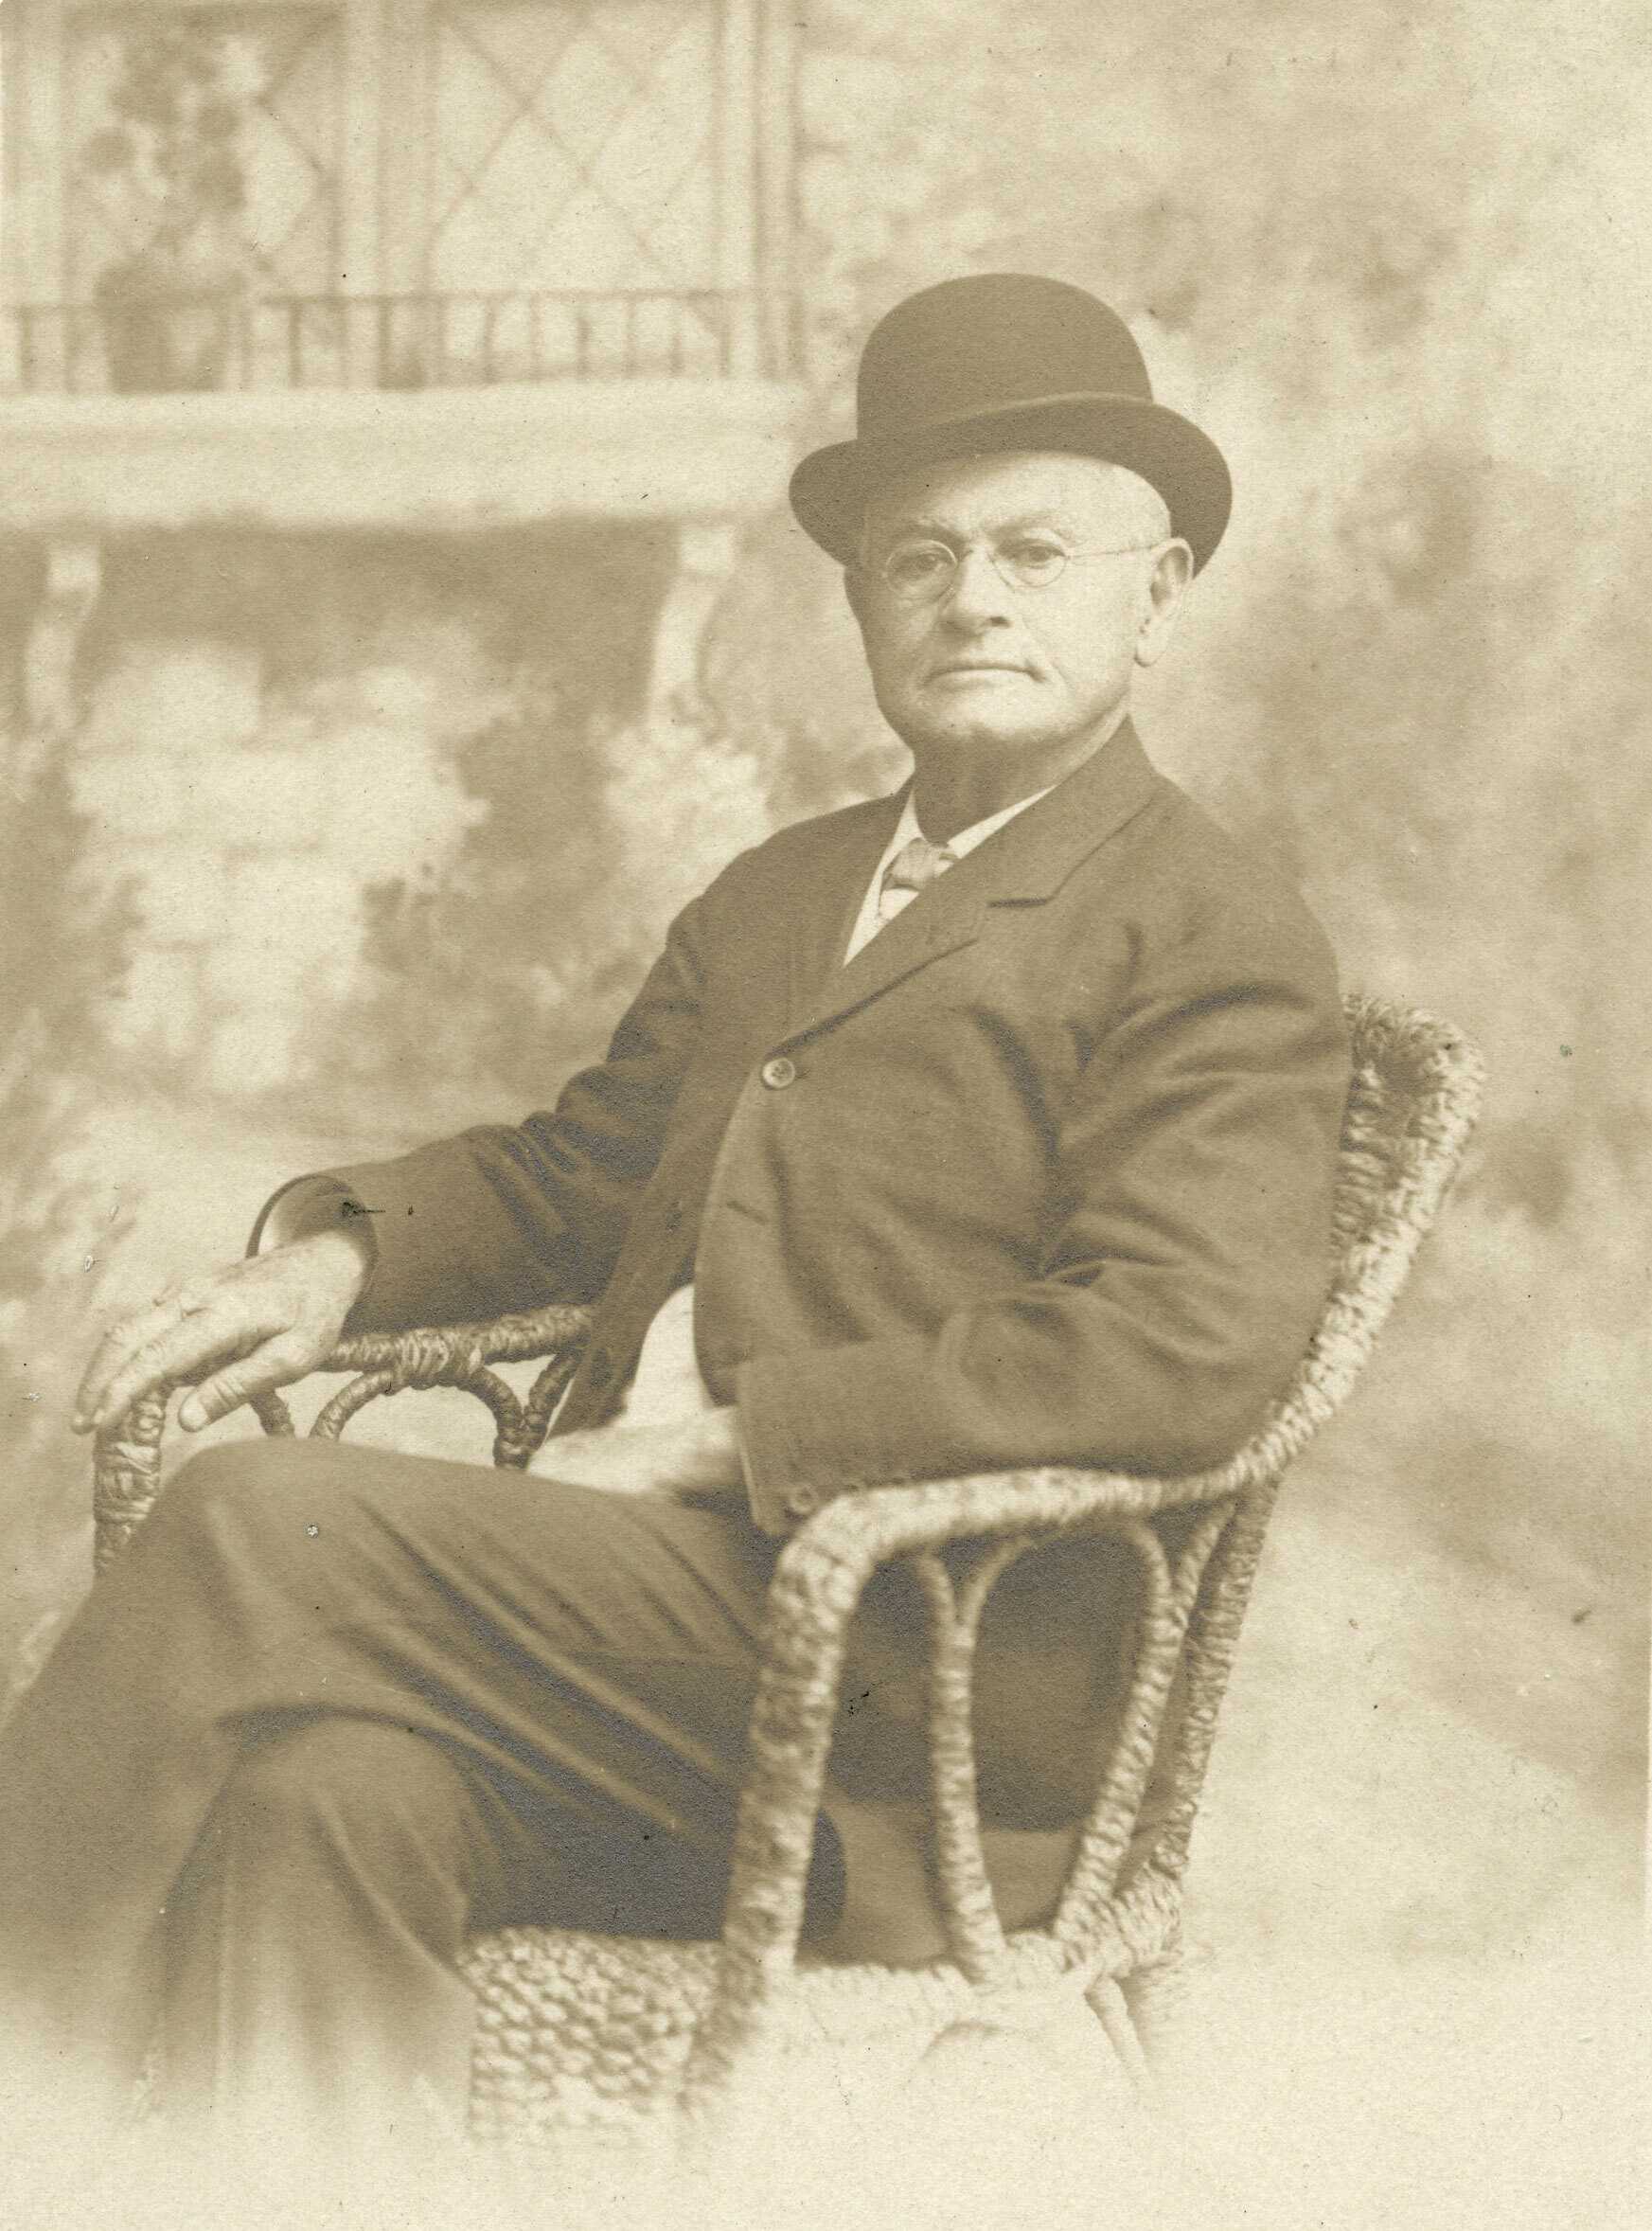 A faded sepia toned portrait of Robert Church sitting in the chair against a garden backdrop.